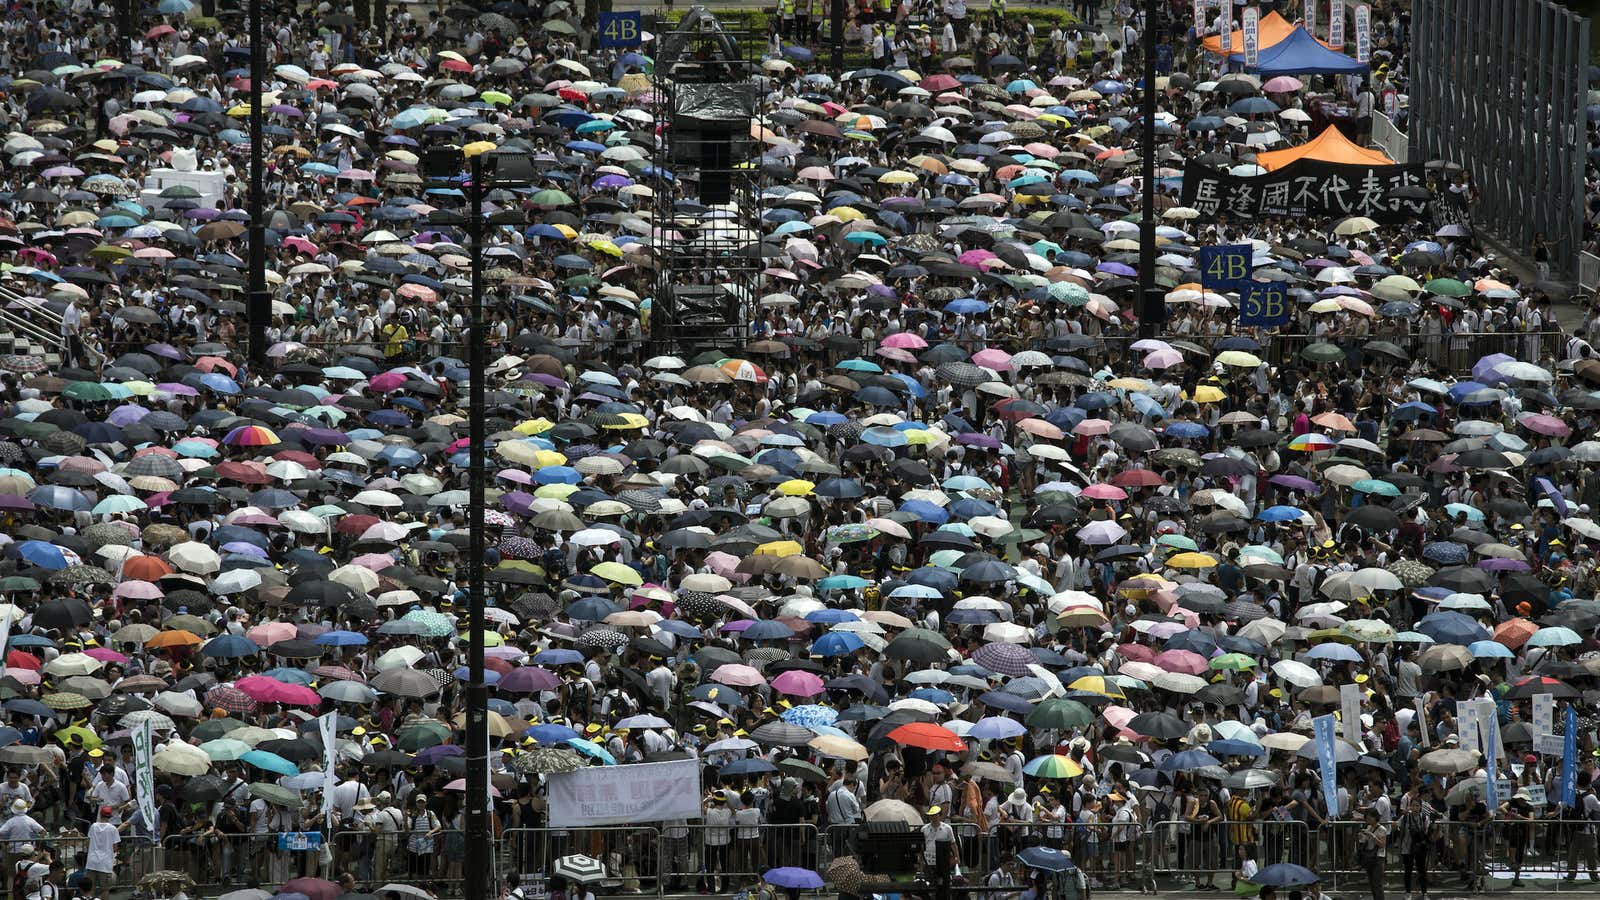 Pro-democracy demonstrators gather on the anniversary of Hong Kong’s return to China.